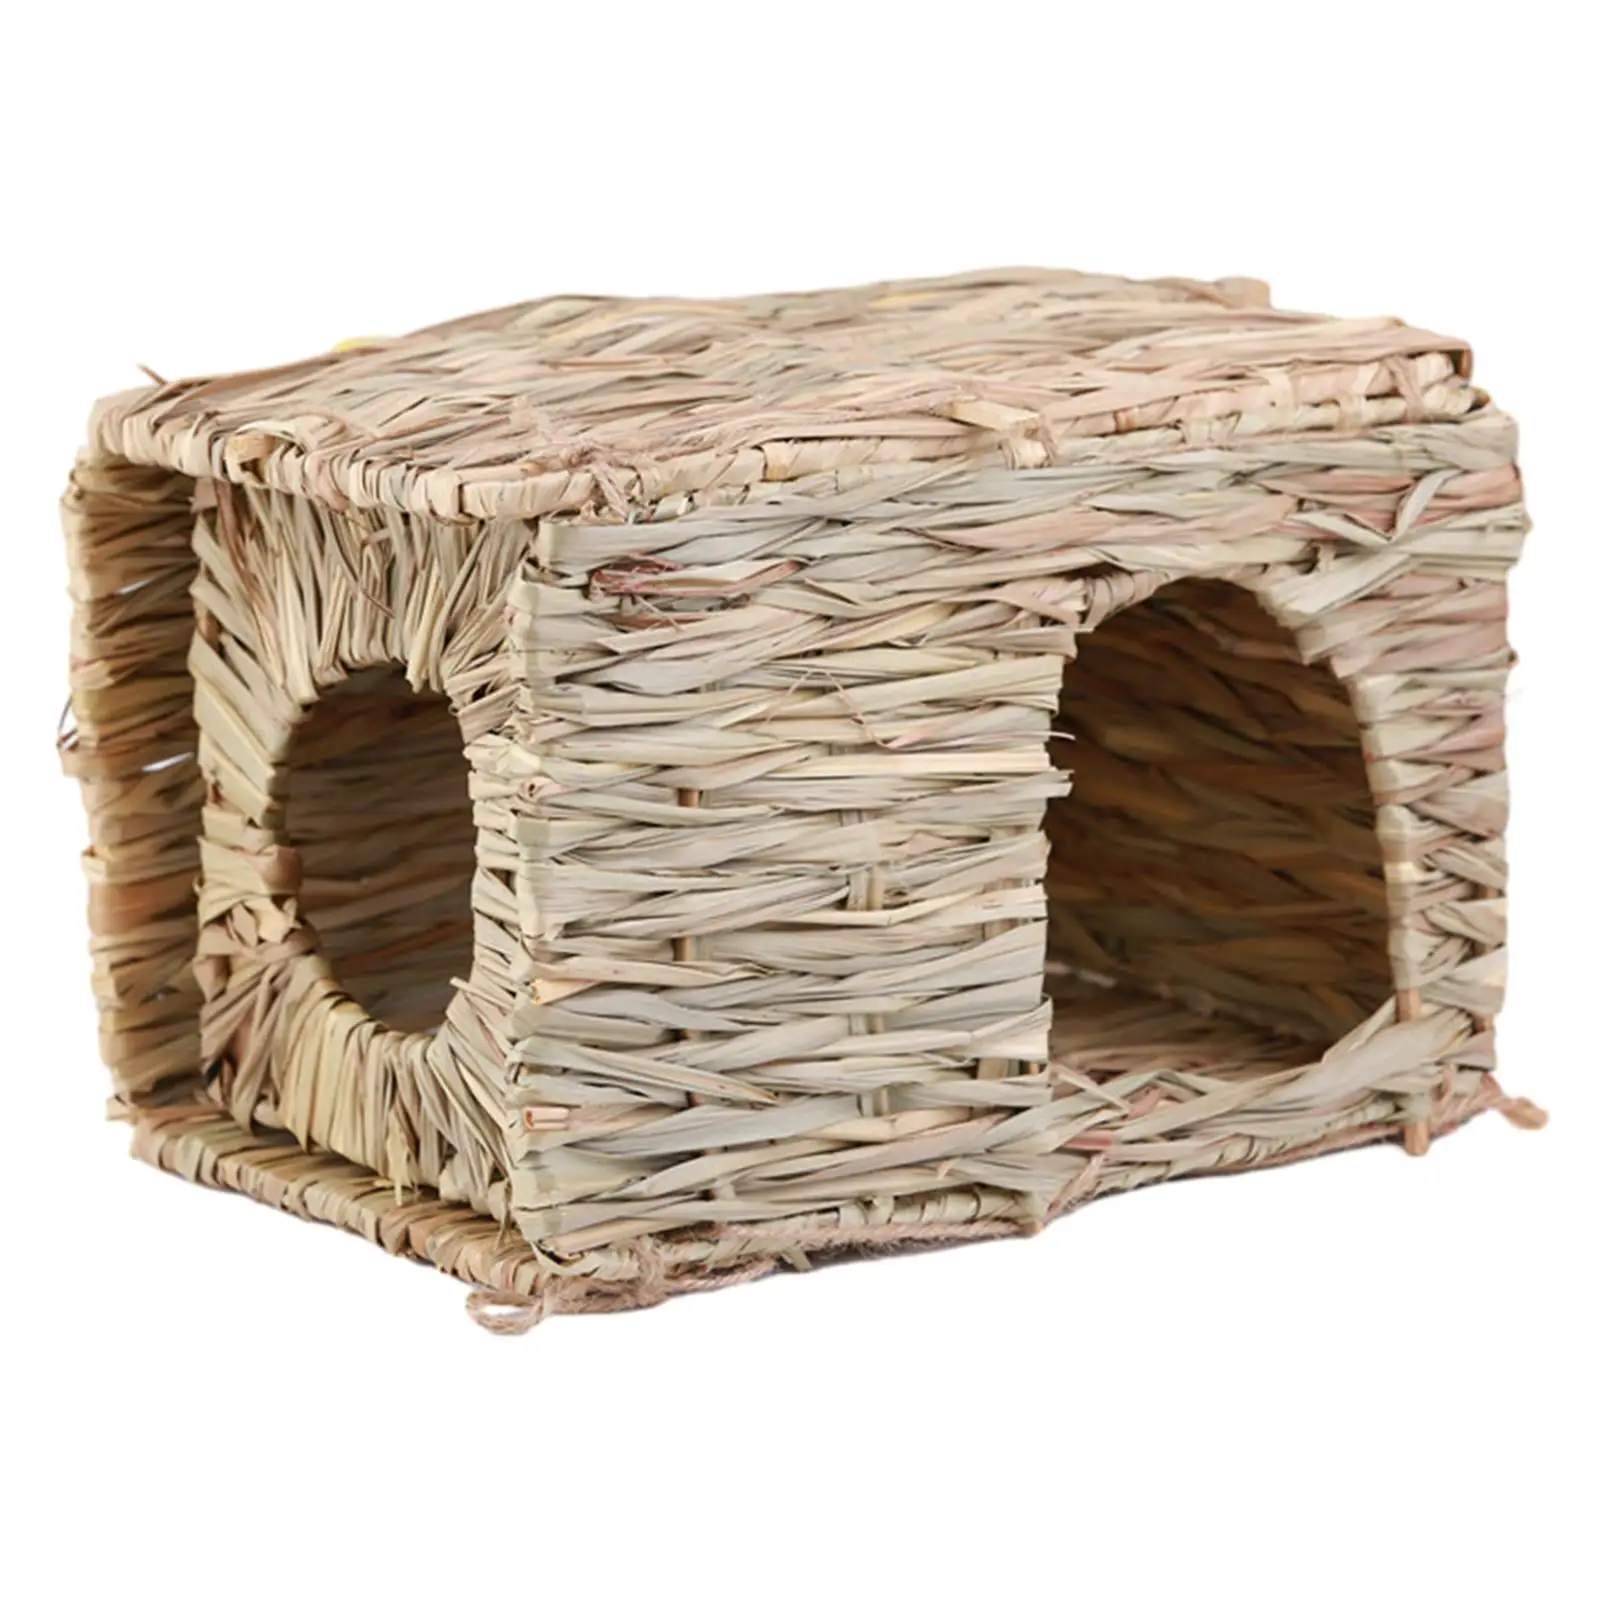 Hand Crafted Grass Hideaway Comfortable Grass Nest for Little Animals Ferret